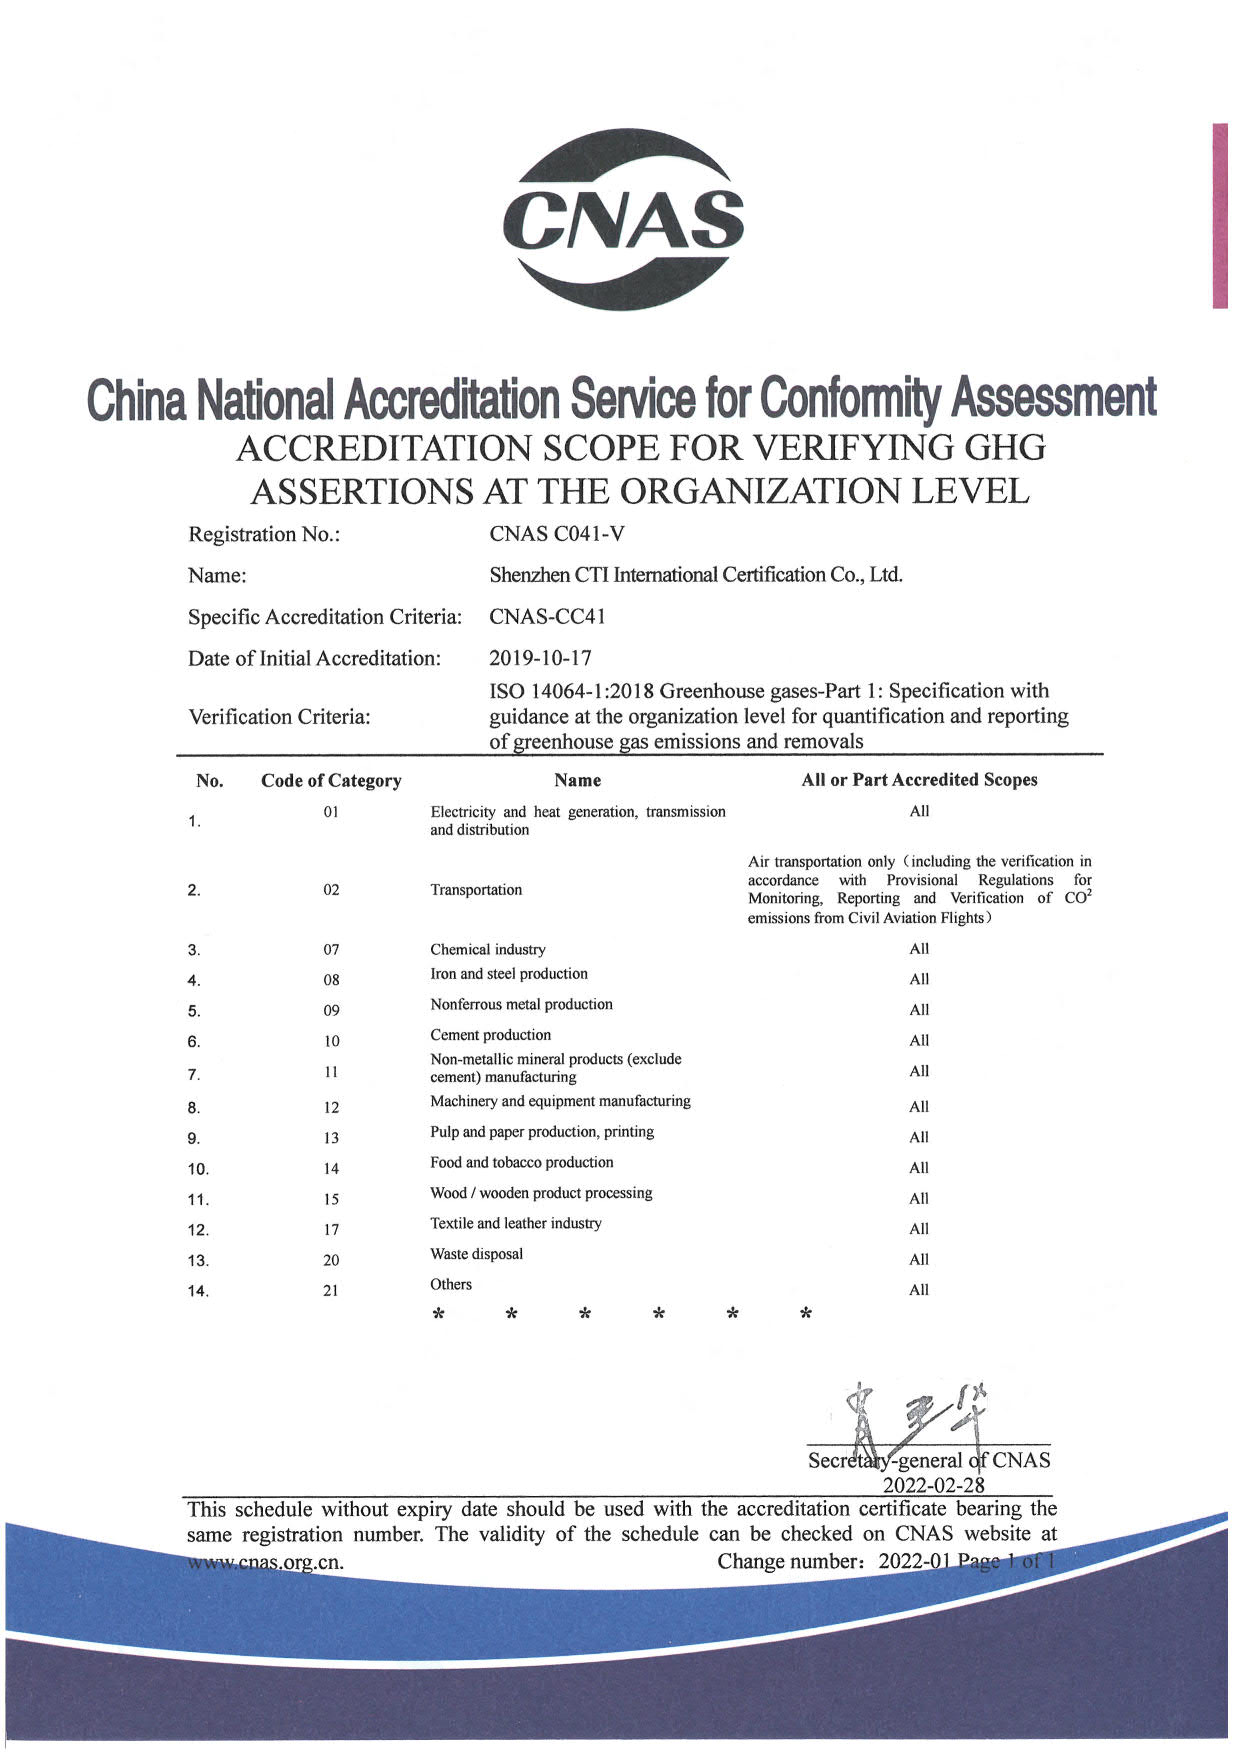 CNAS ISO 14064-1:2018 Greenhouse Gas Validation and Verification Agency accreditation